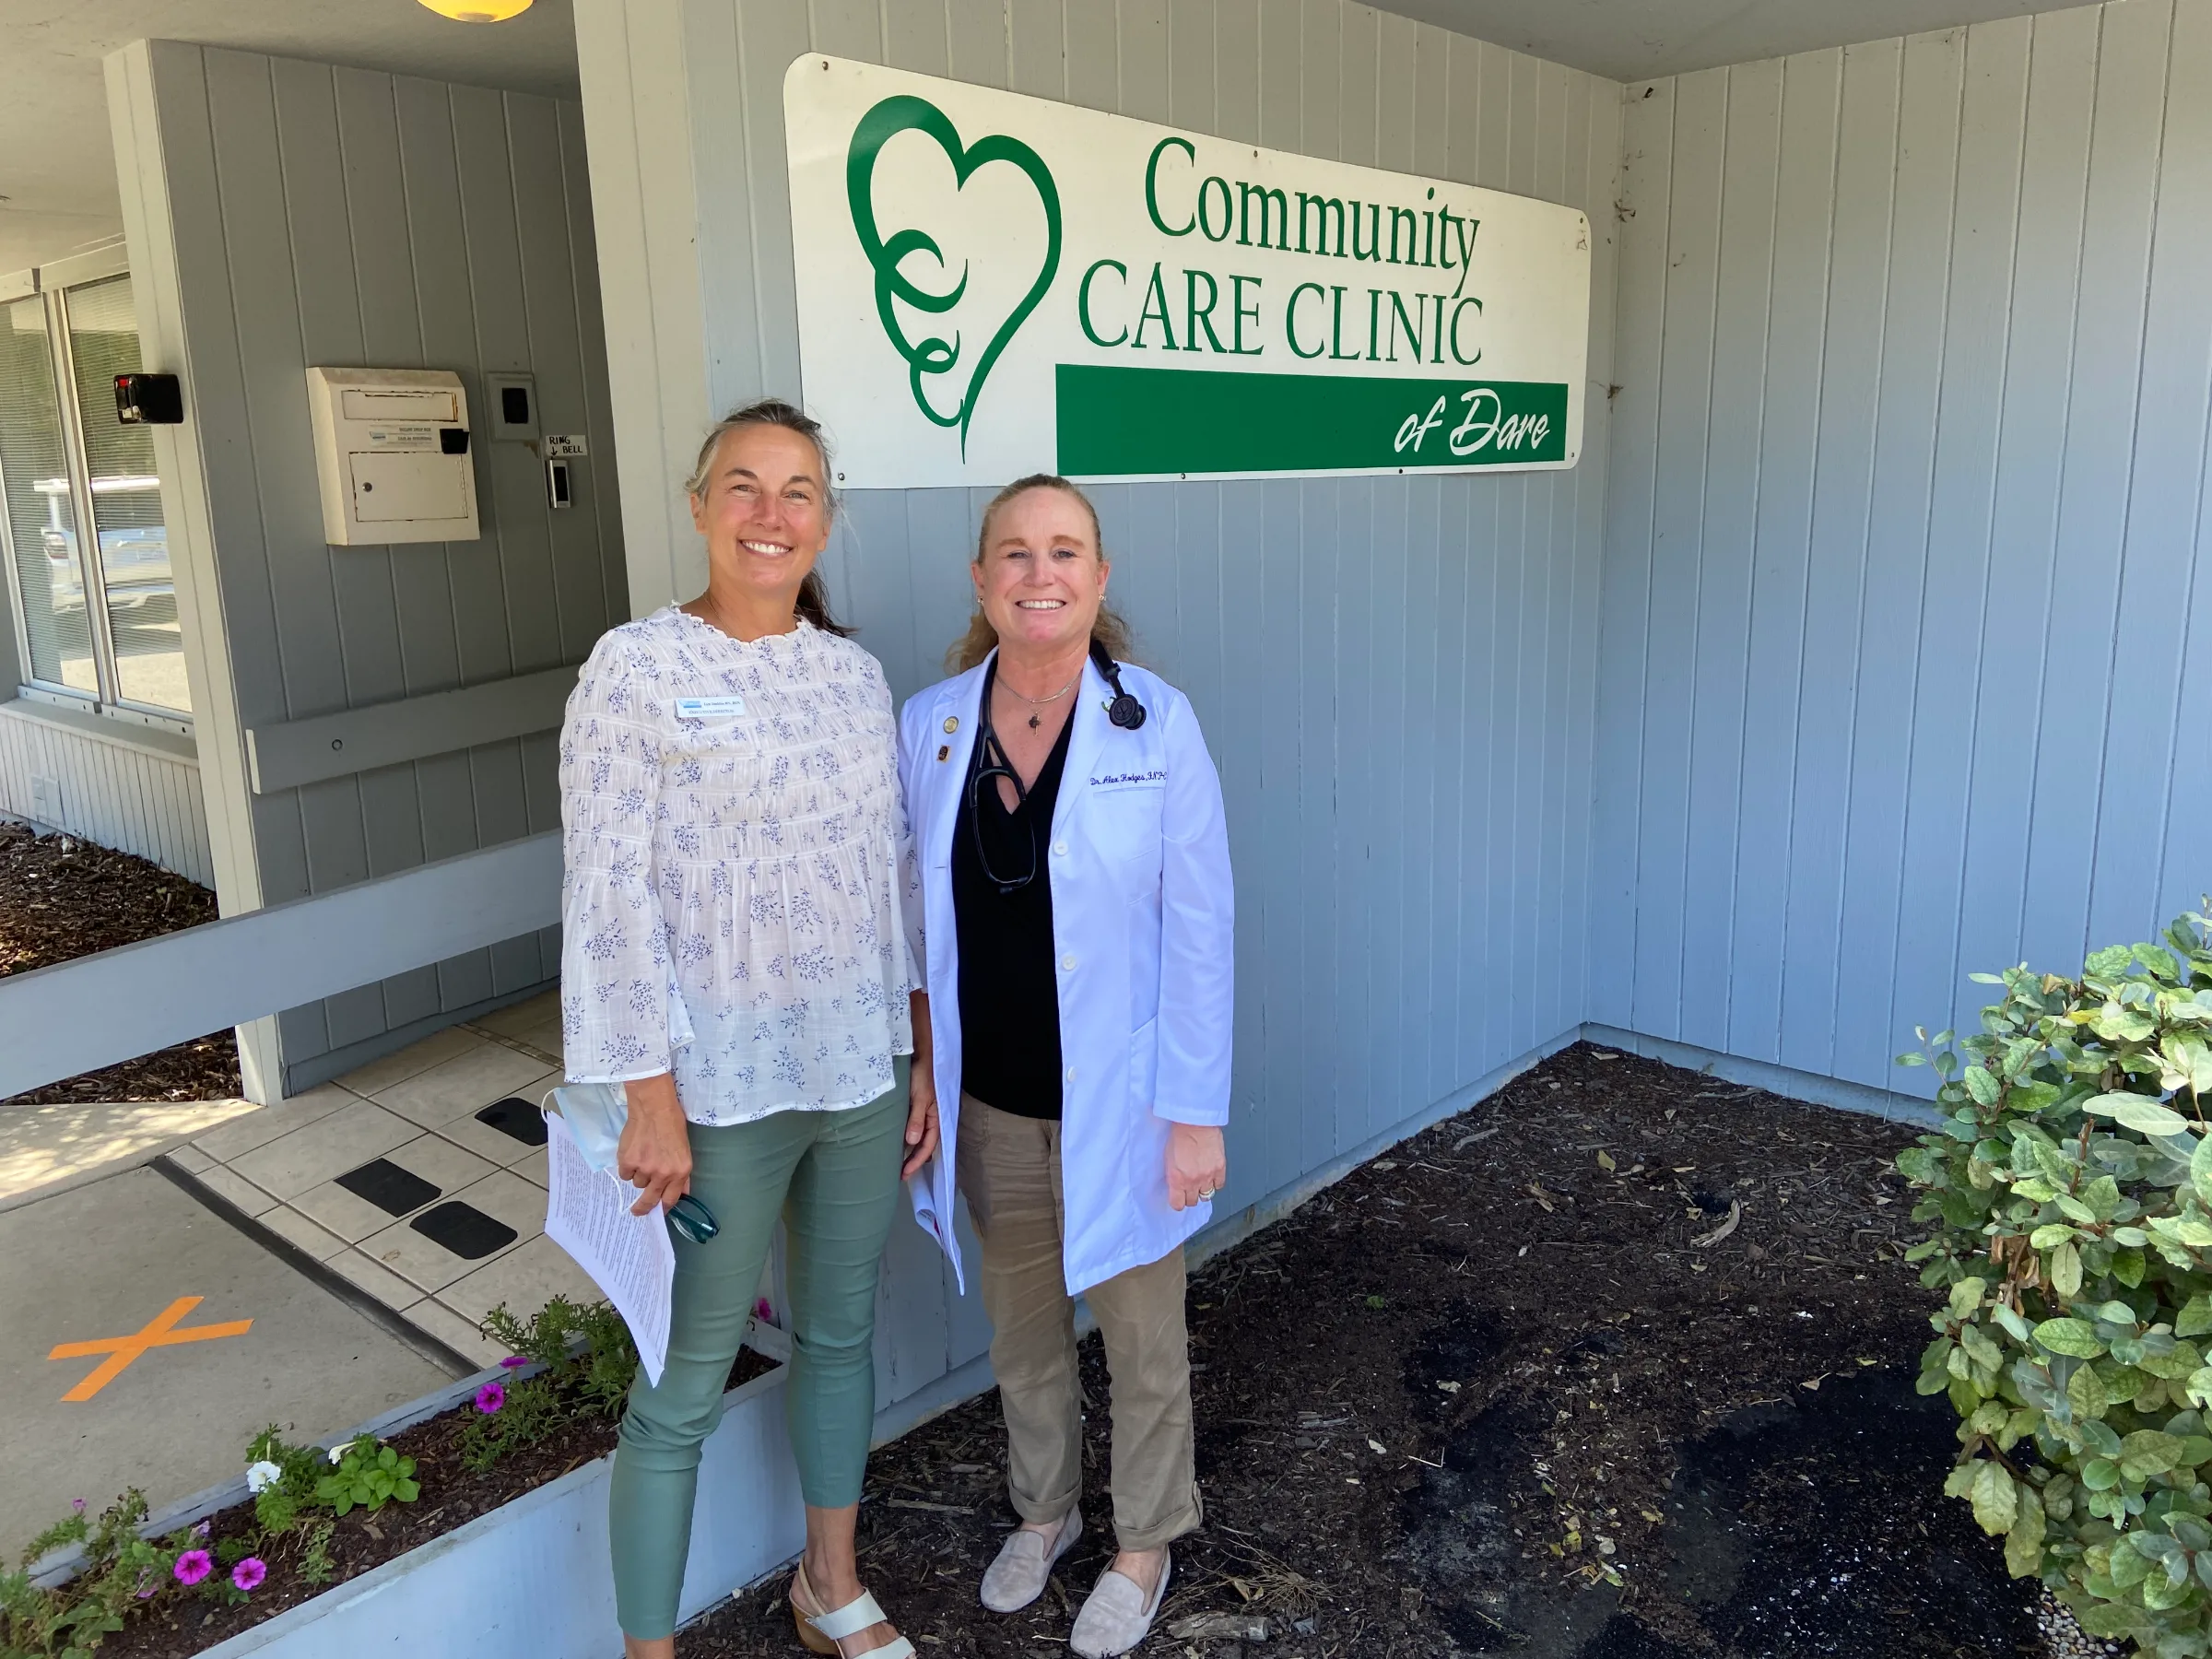 Lyn Jenkins, executive director of the Community Care Clinic of Dare (L), and nurse practitioner Alexis Hodges (R) pose for a photo outside of the clinic in Nags Head, North Carolina, USA, September 7, 2022. Thomson Reuters Foundation/David Sherfinski